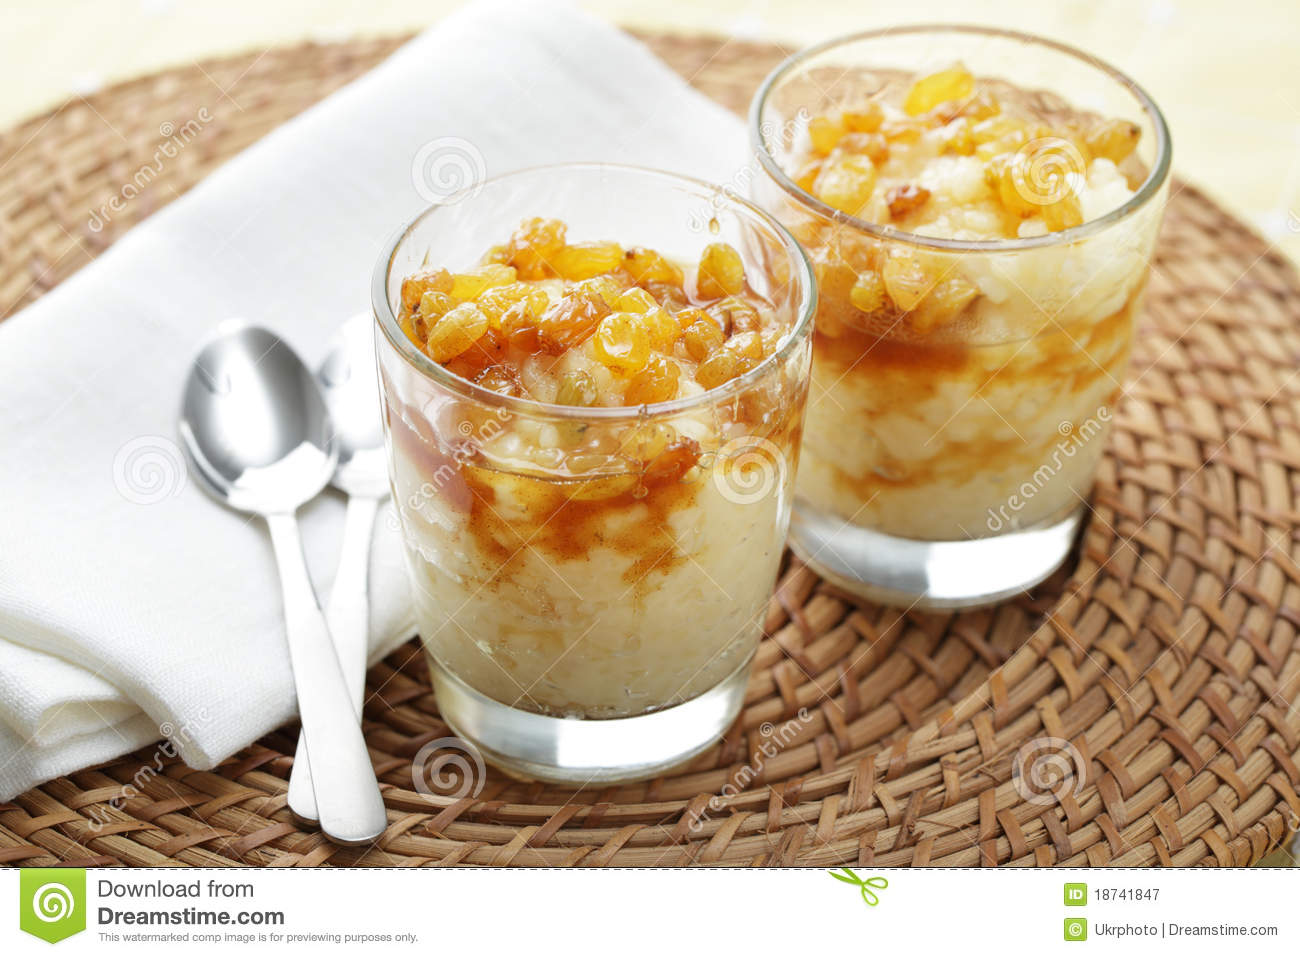 Rice Pudding Royalty Free Stock Photography   Image  18741847